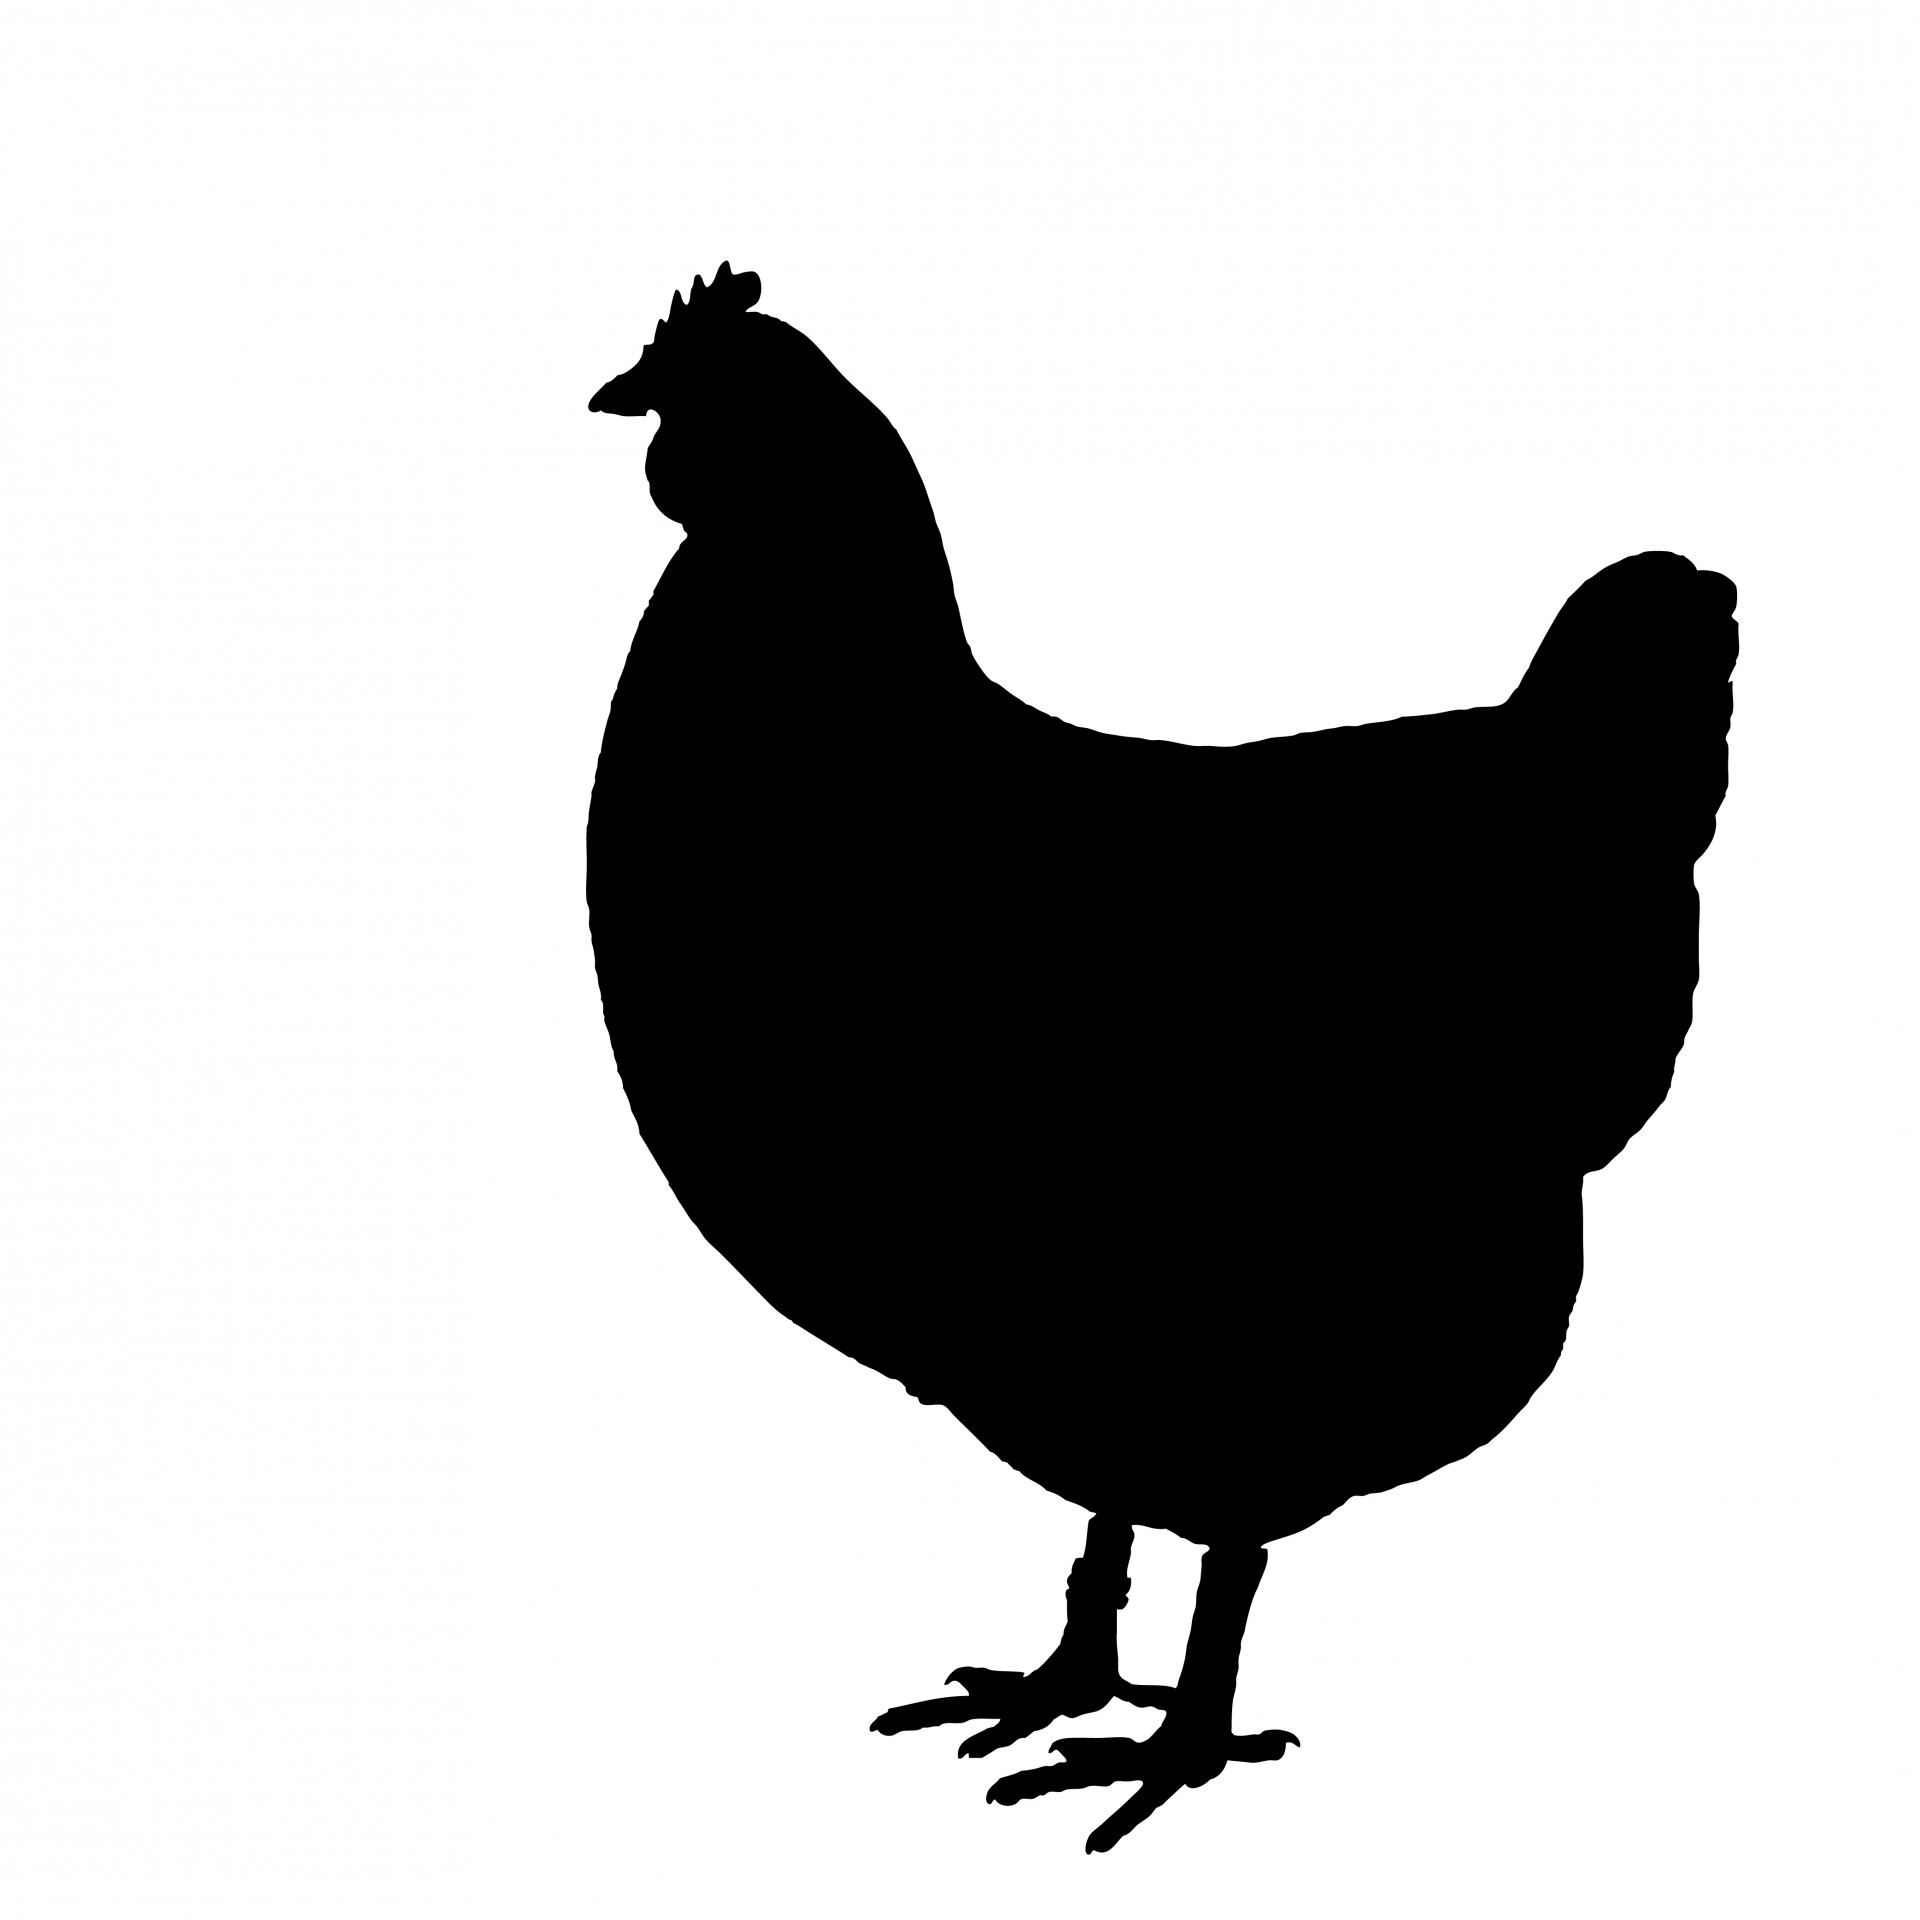 Chicken Silhouette Clipart Images.